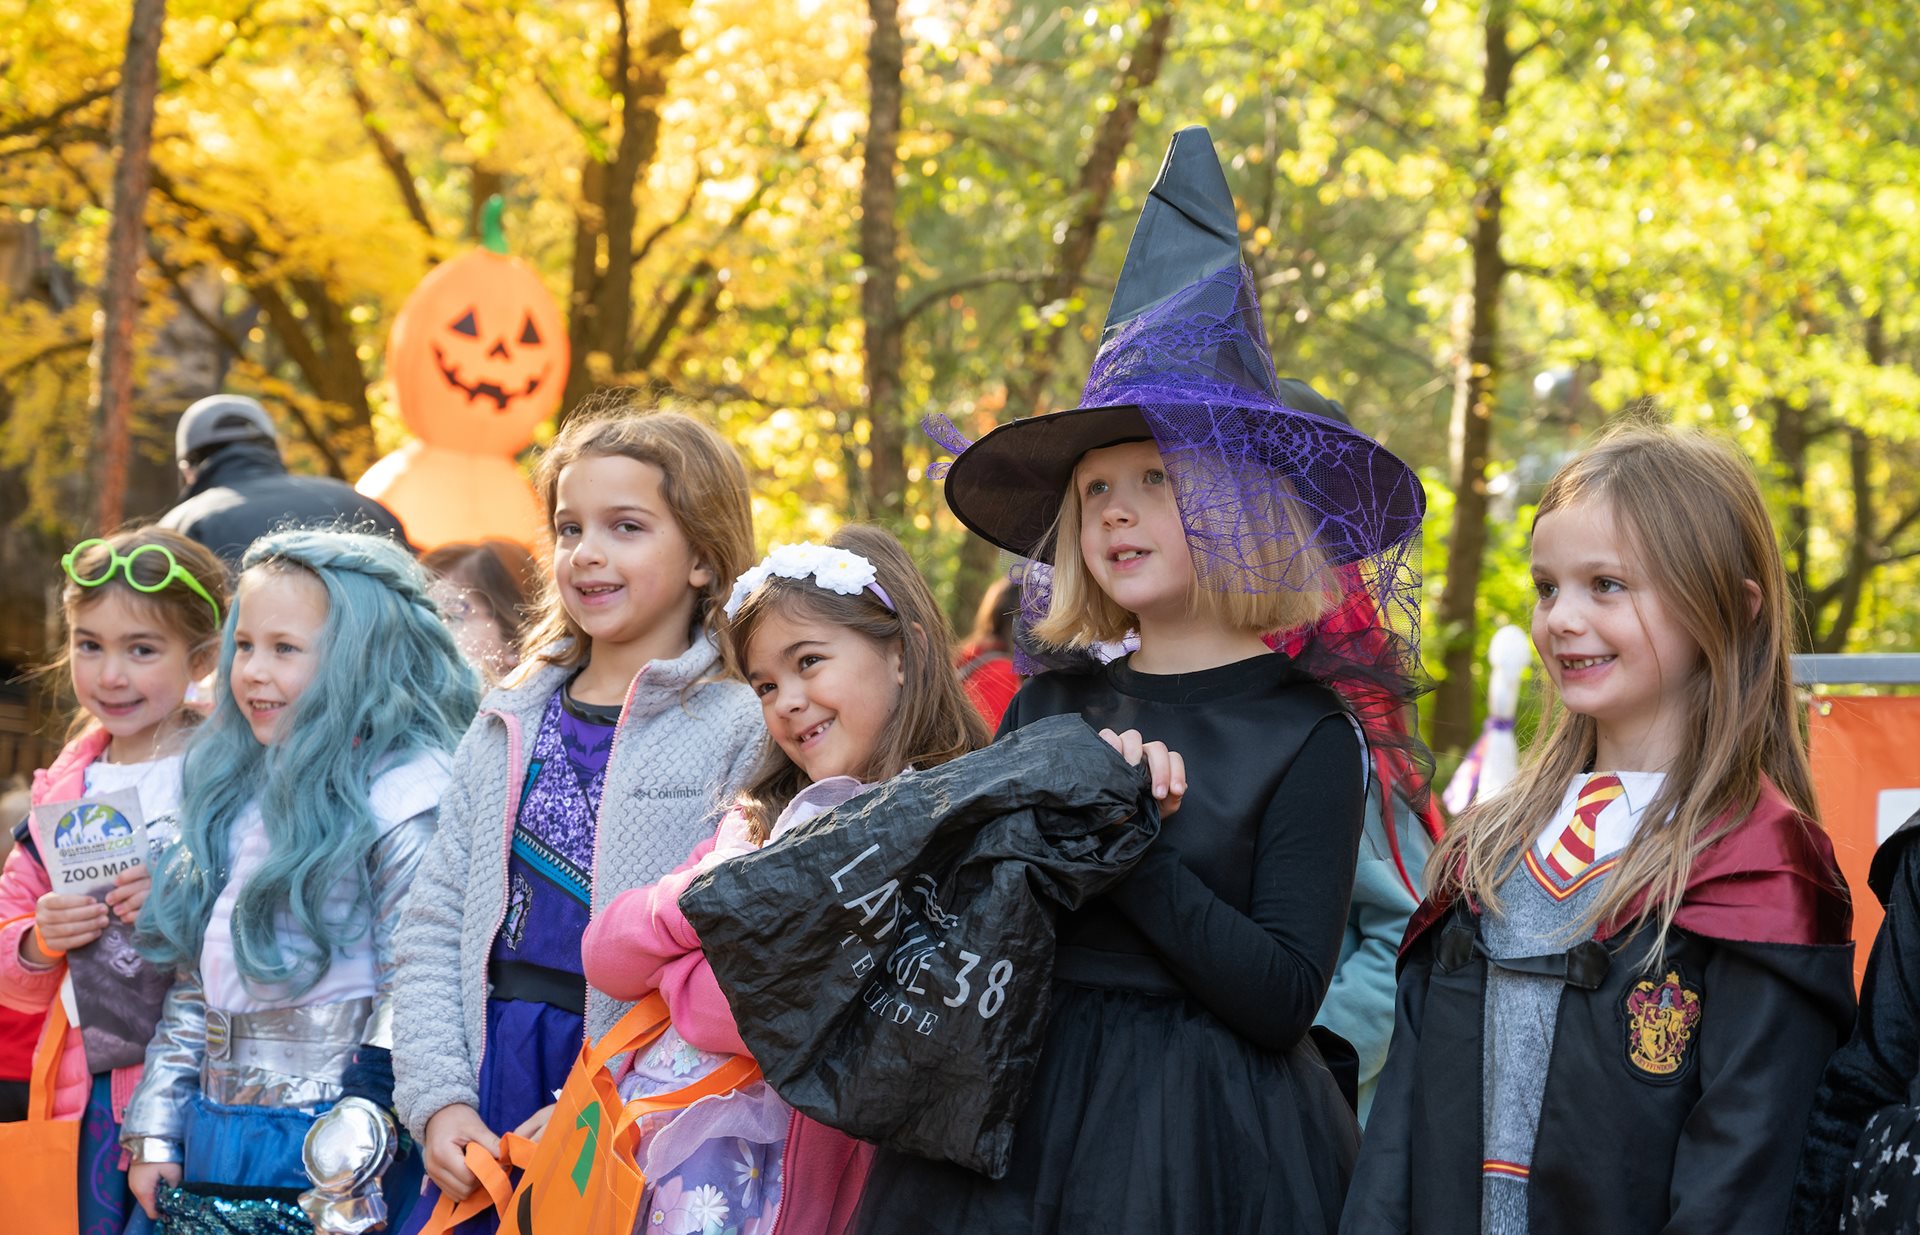 Cleveland Metroparks Zoo Announces the Return of Trick-or-Treat Fest Presented by Citizens 